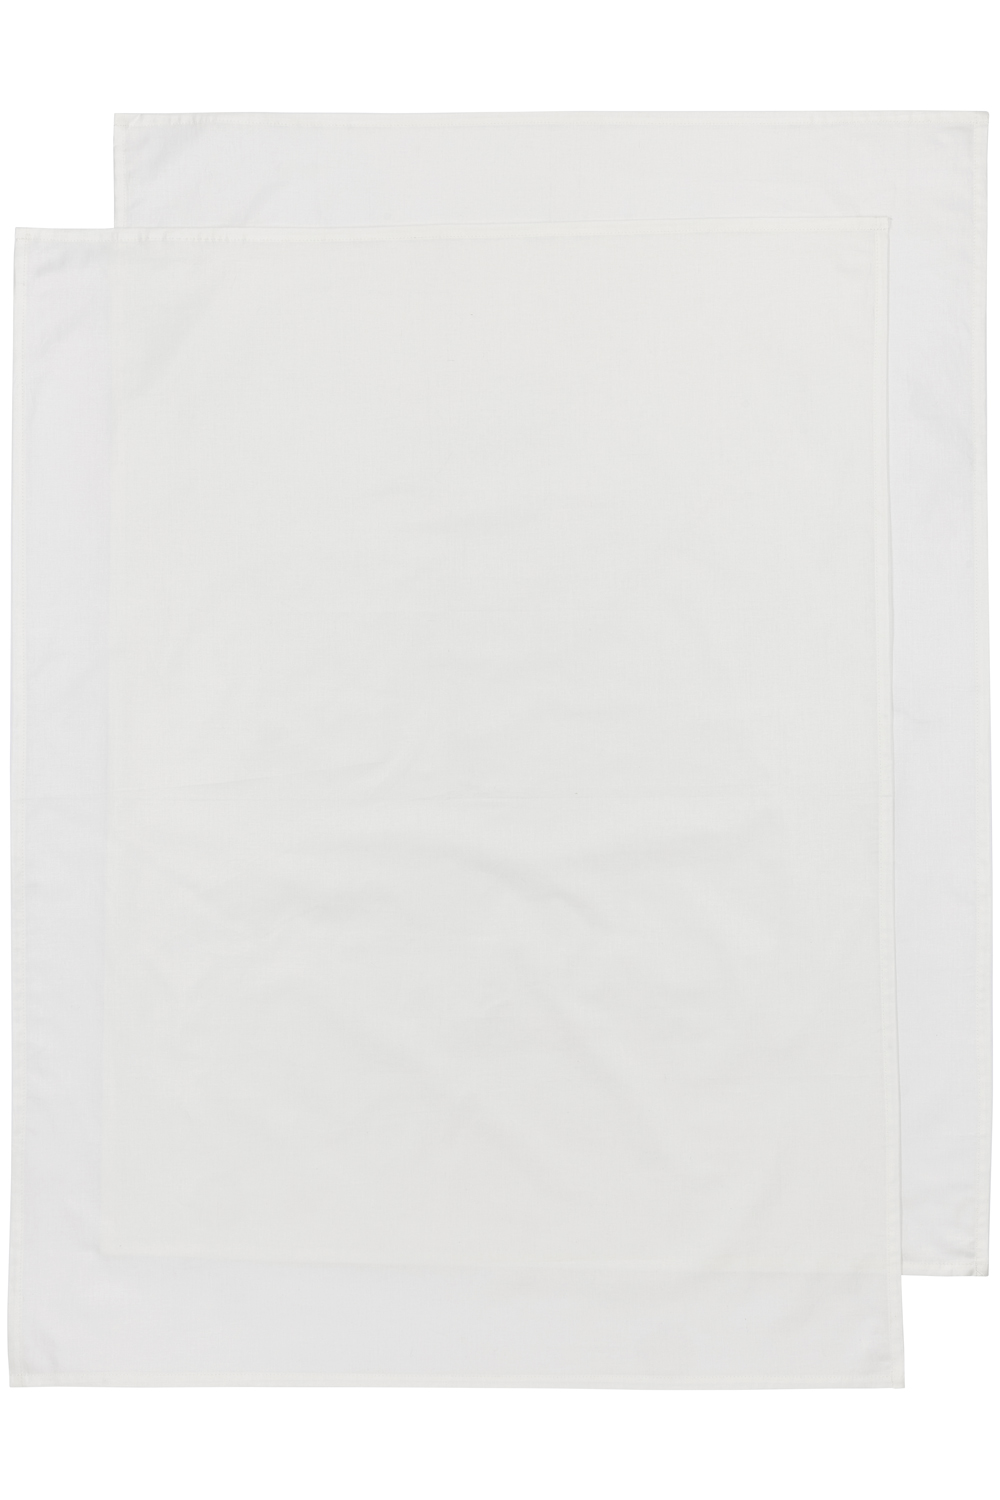 Cod Bed Sheet 2-pack Uni- Offwhite - 100x150cm